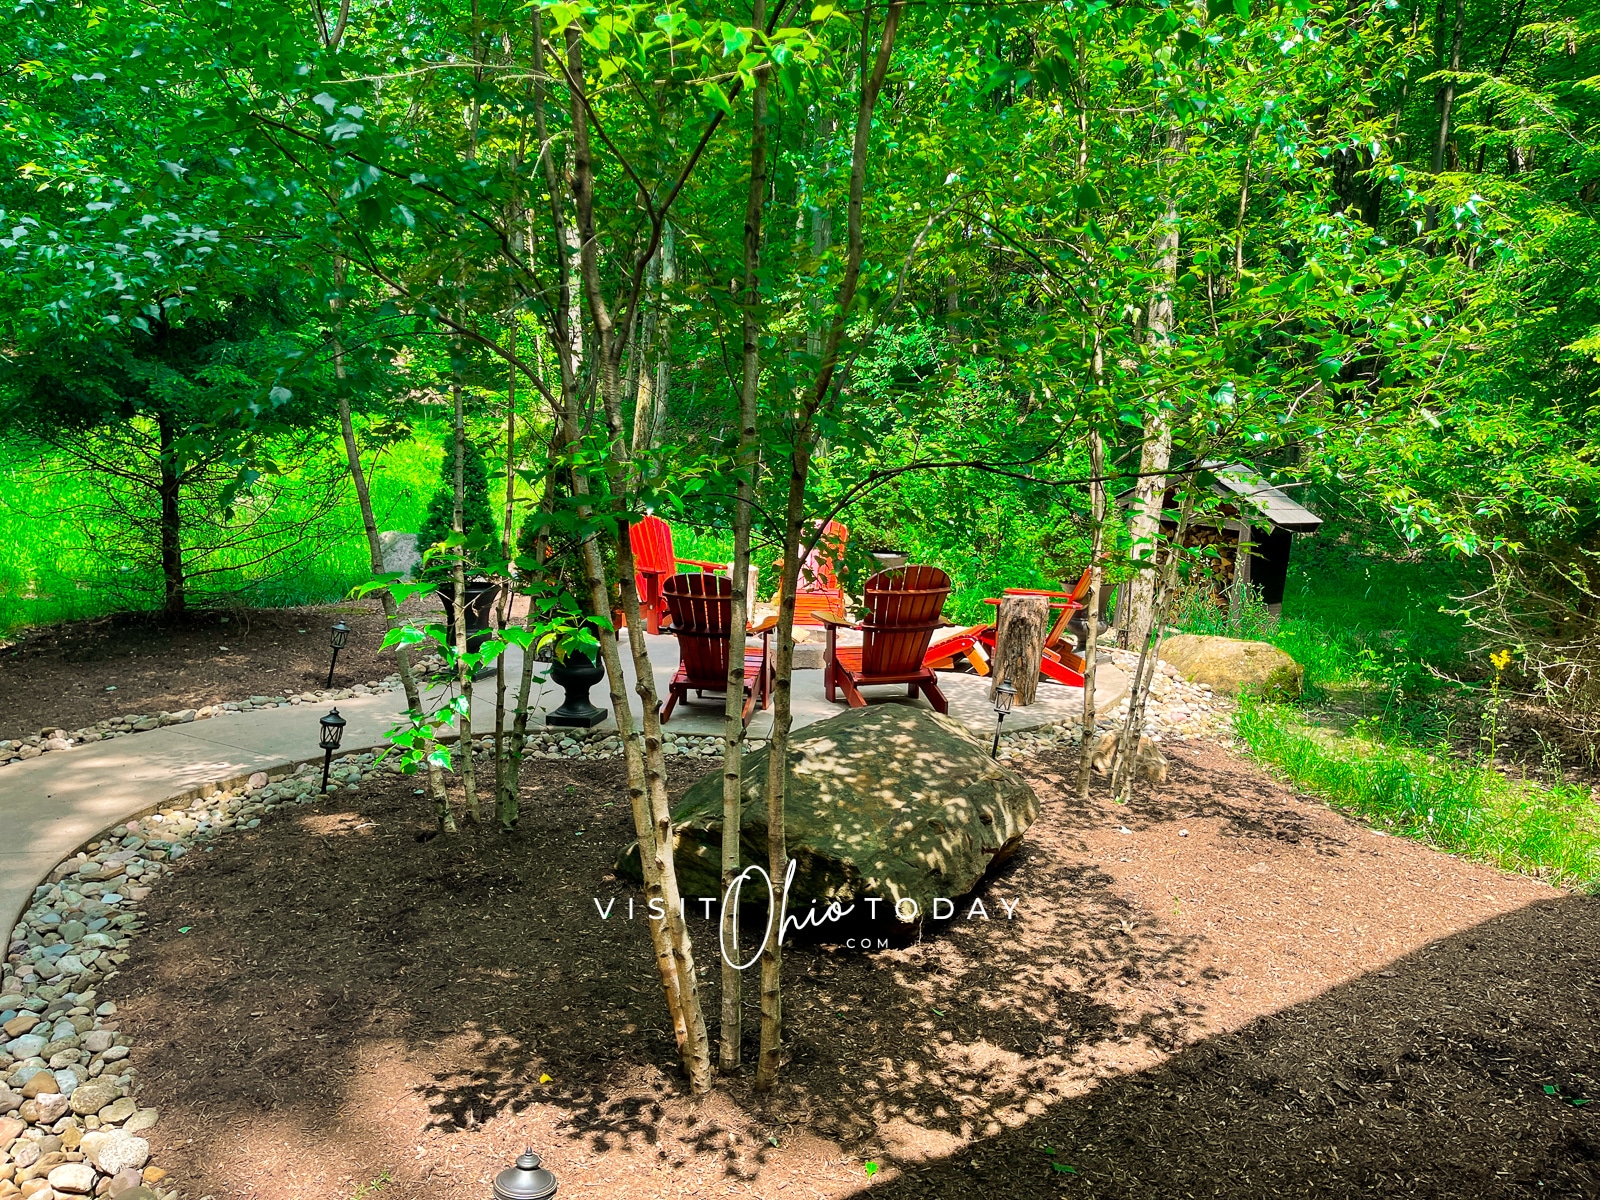 green trees and paved path leading to fire pit with 6 red chairs